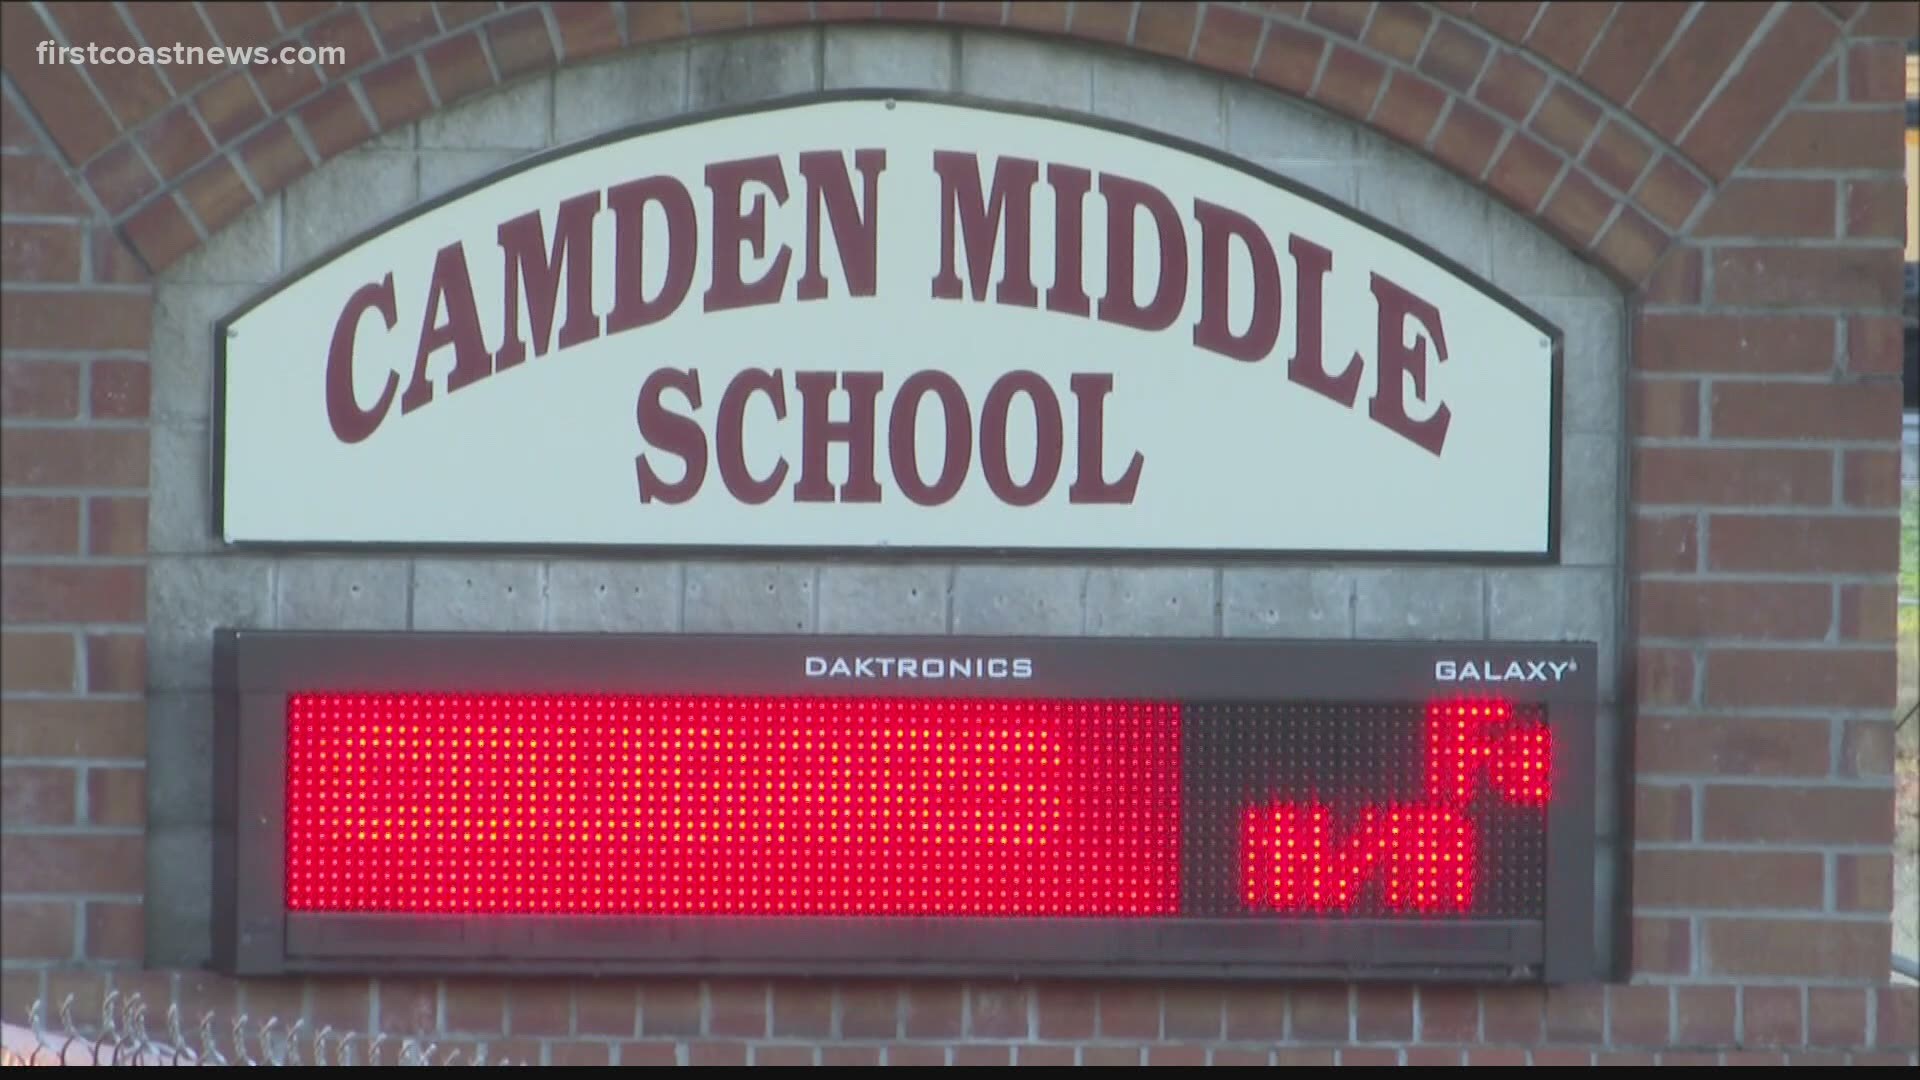 The alleged sexual misconduct happened while Steven Rayle was at work at Camden Middle School.